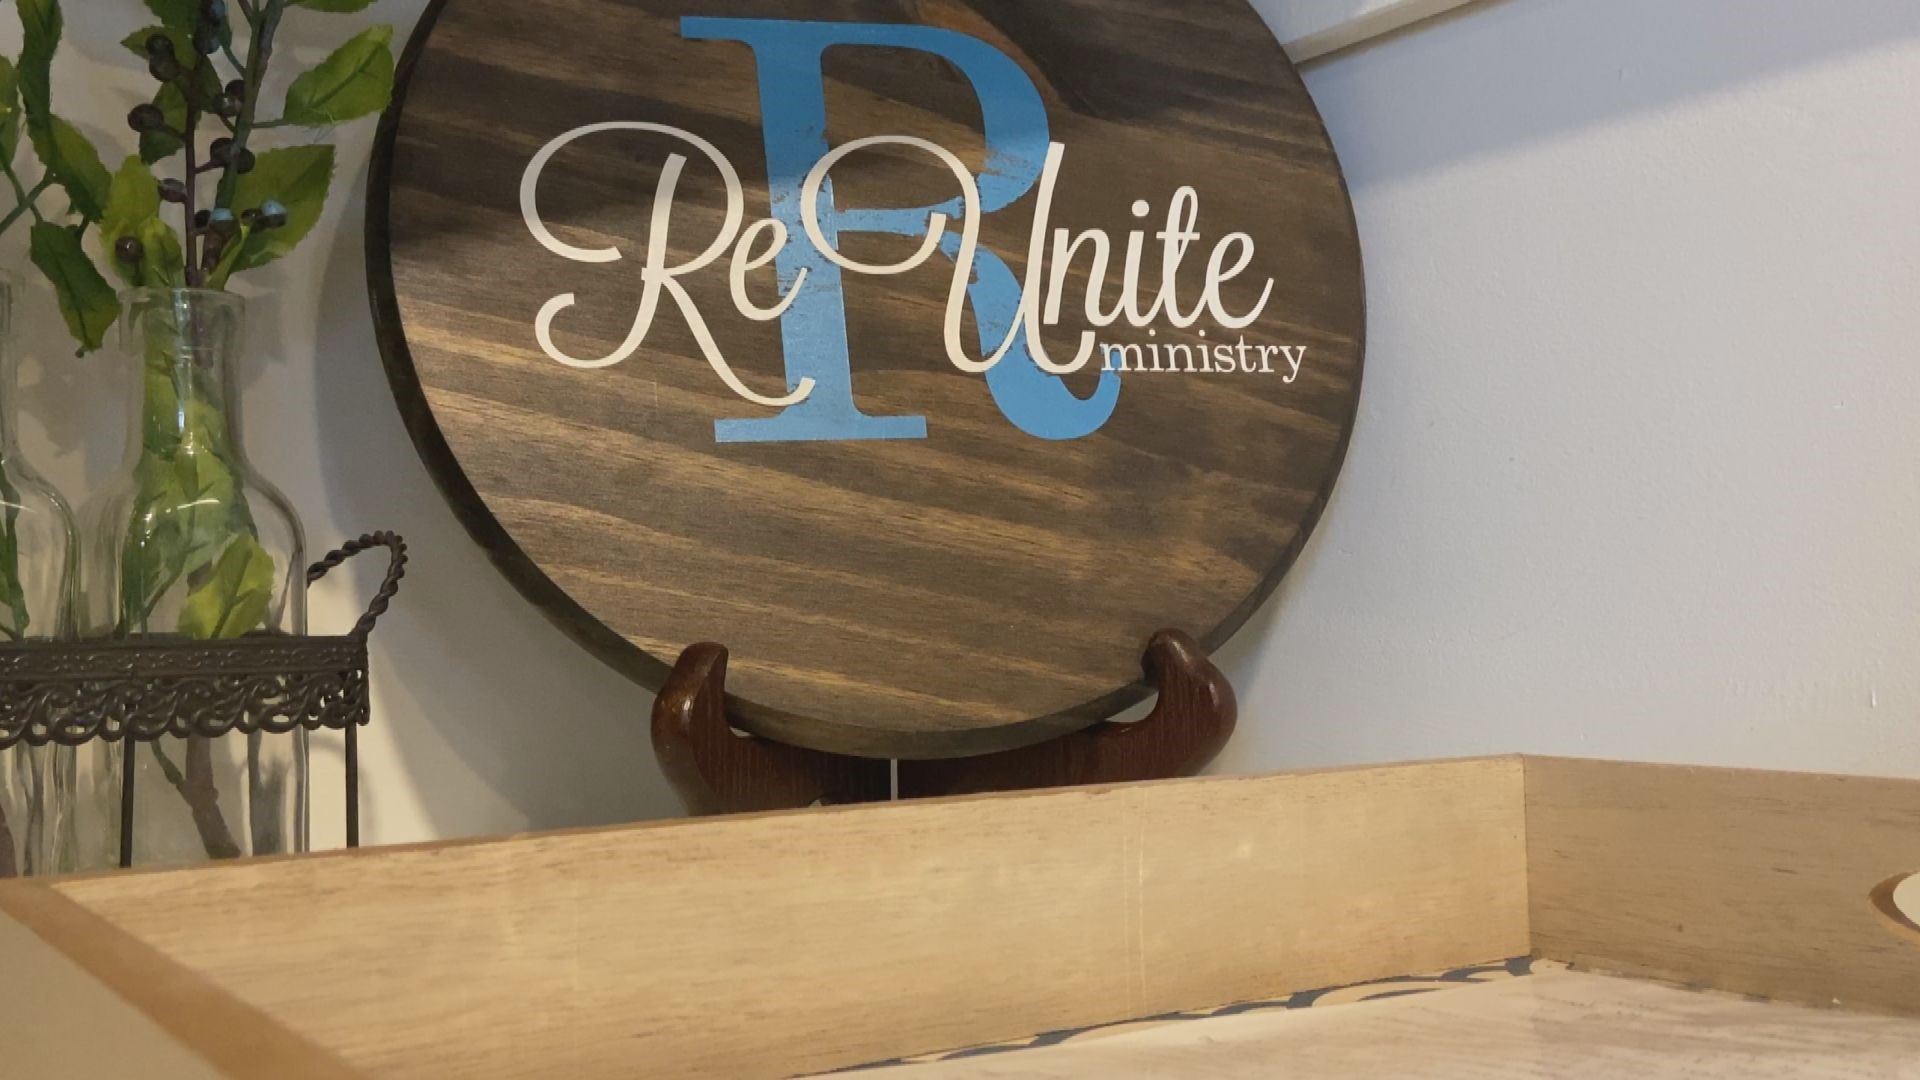 Reunite Ministry is now officially open and ready to help moms get back on their feet.